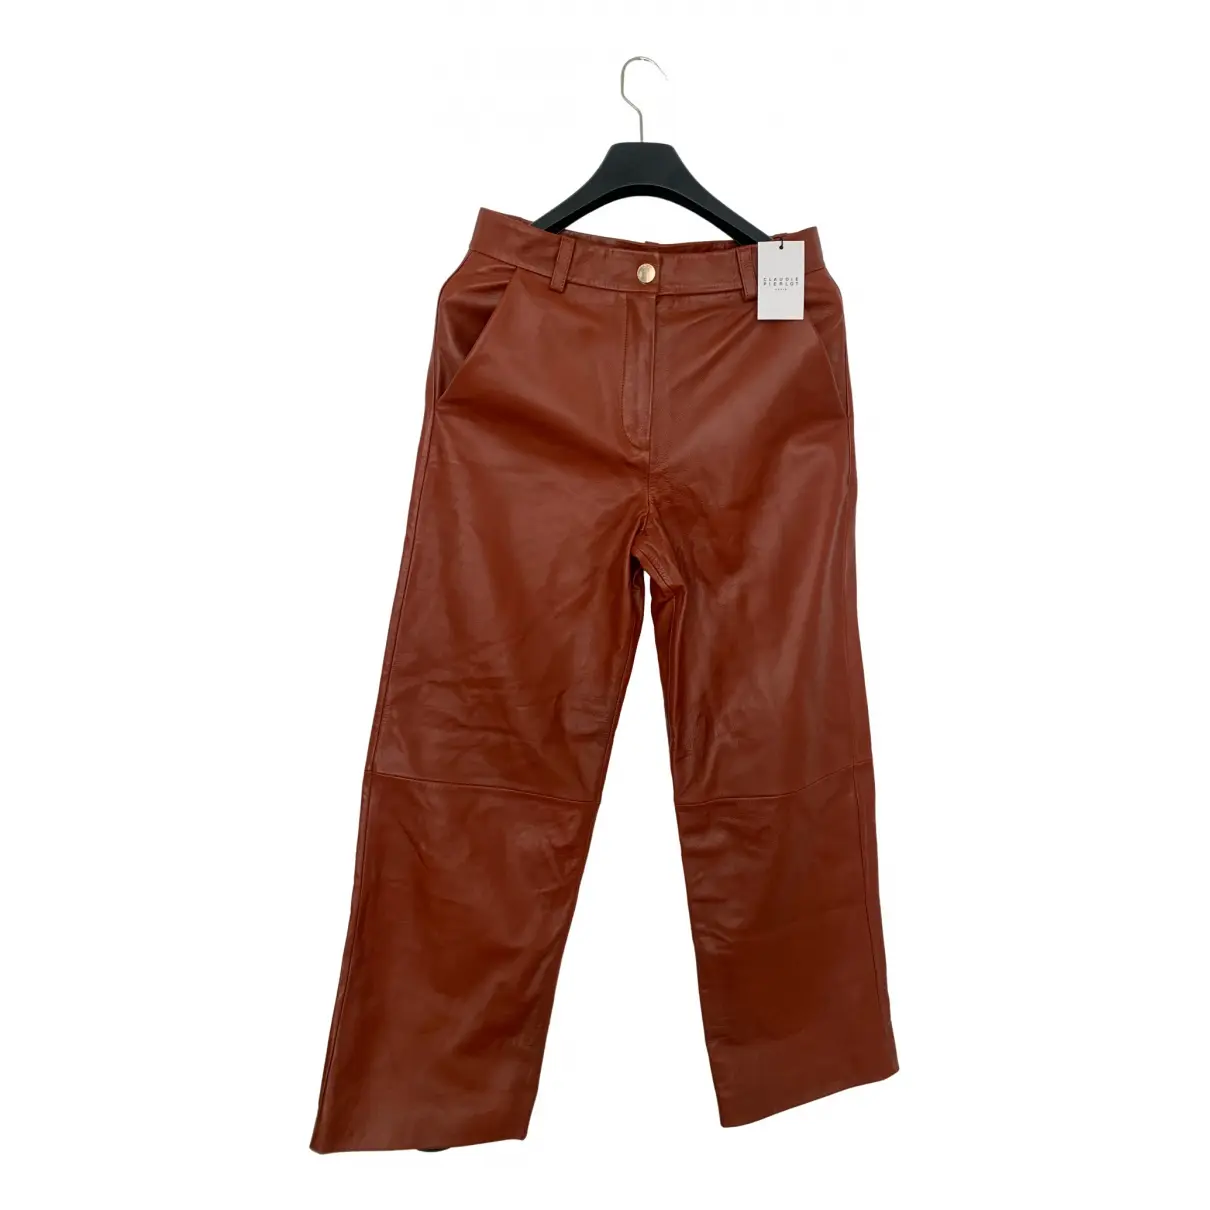 Fall Winter 2020 leather straight pants Claudie Pierlot